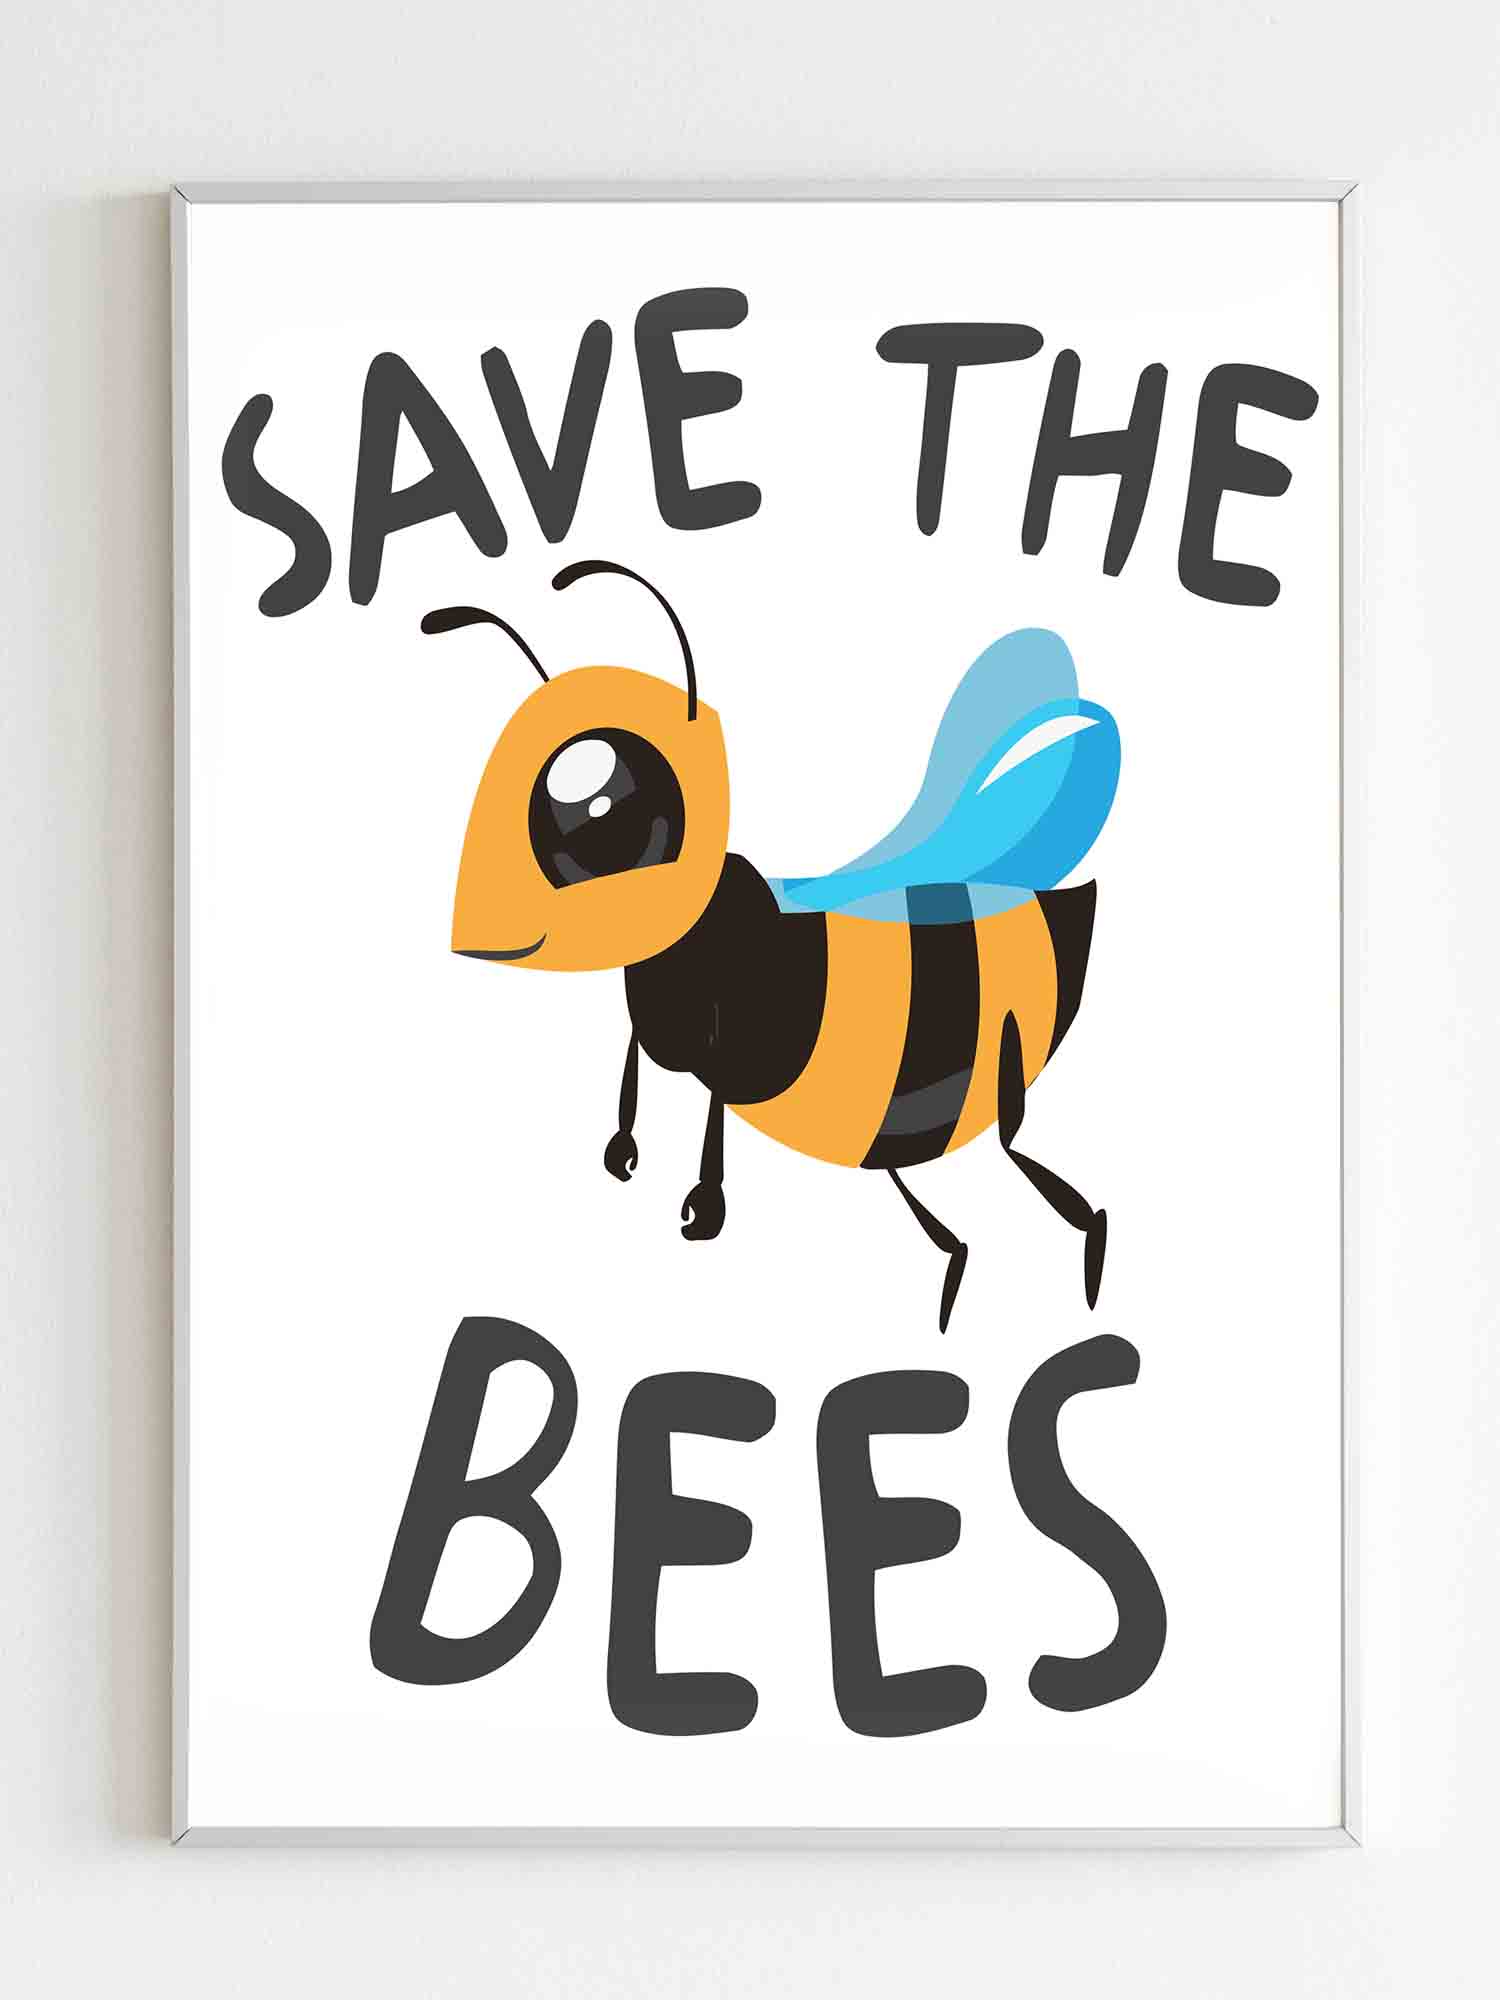 Honey Bee Save The Bees Poster Poster Art Design